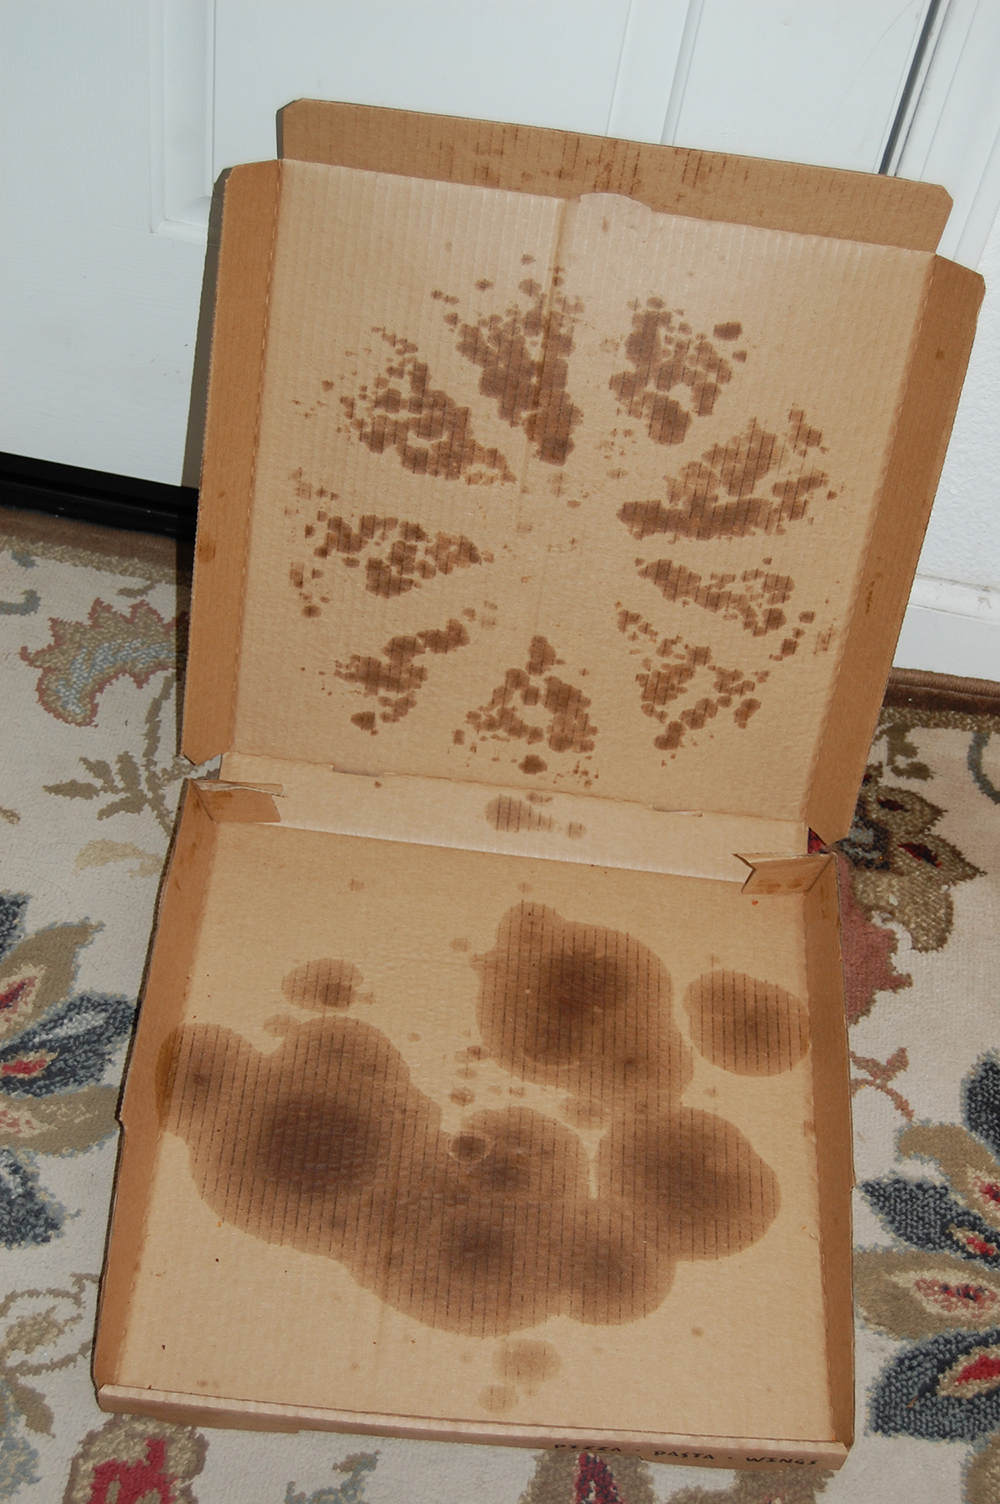 example of pizza_boxes